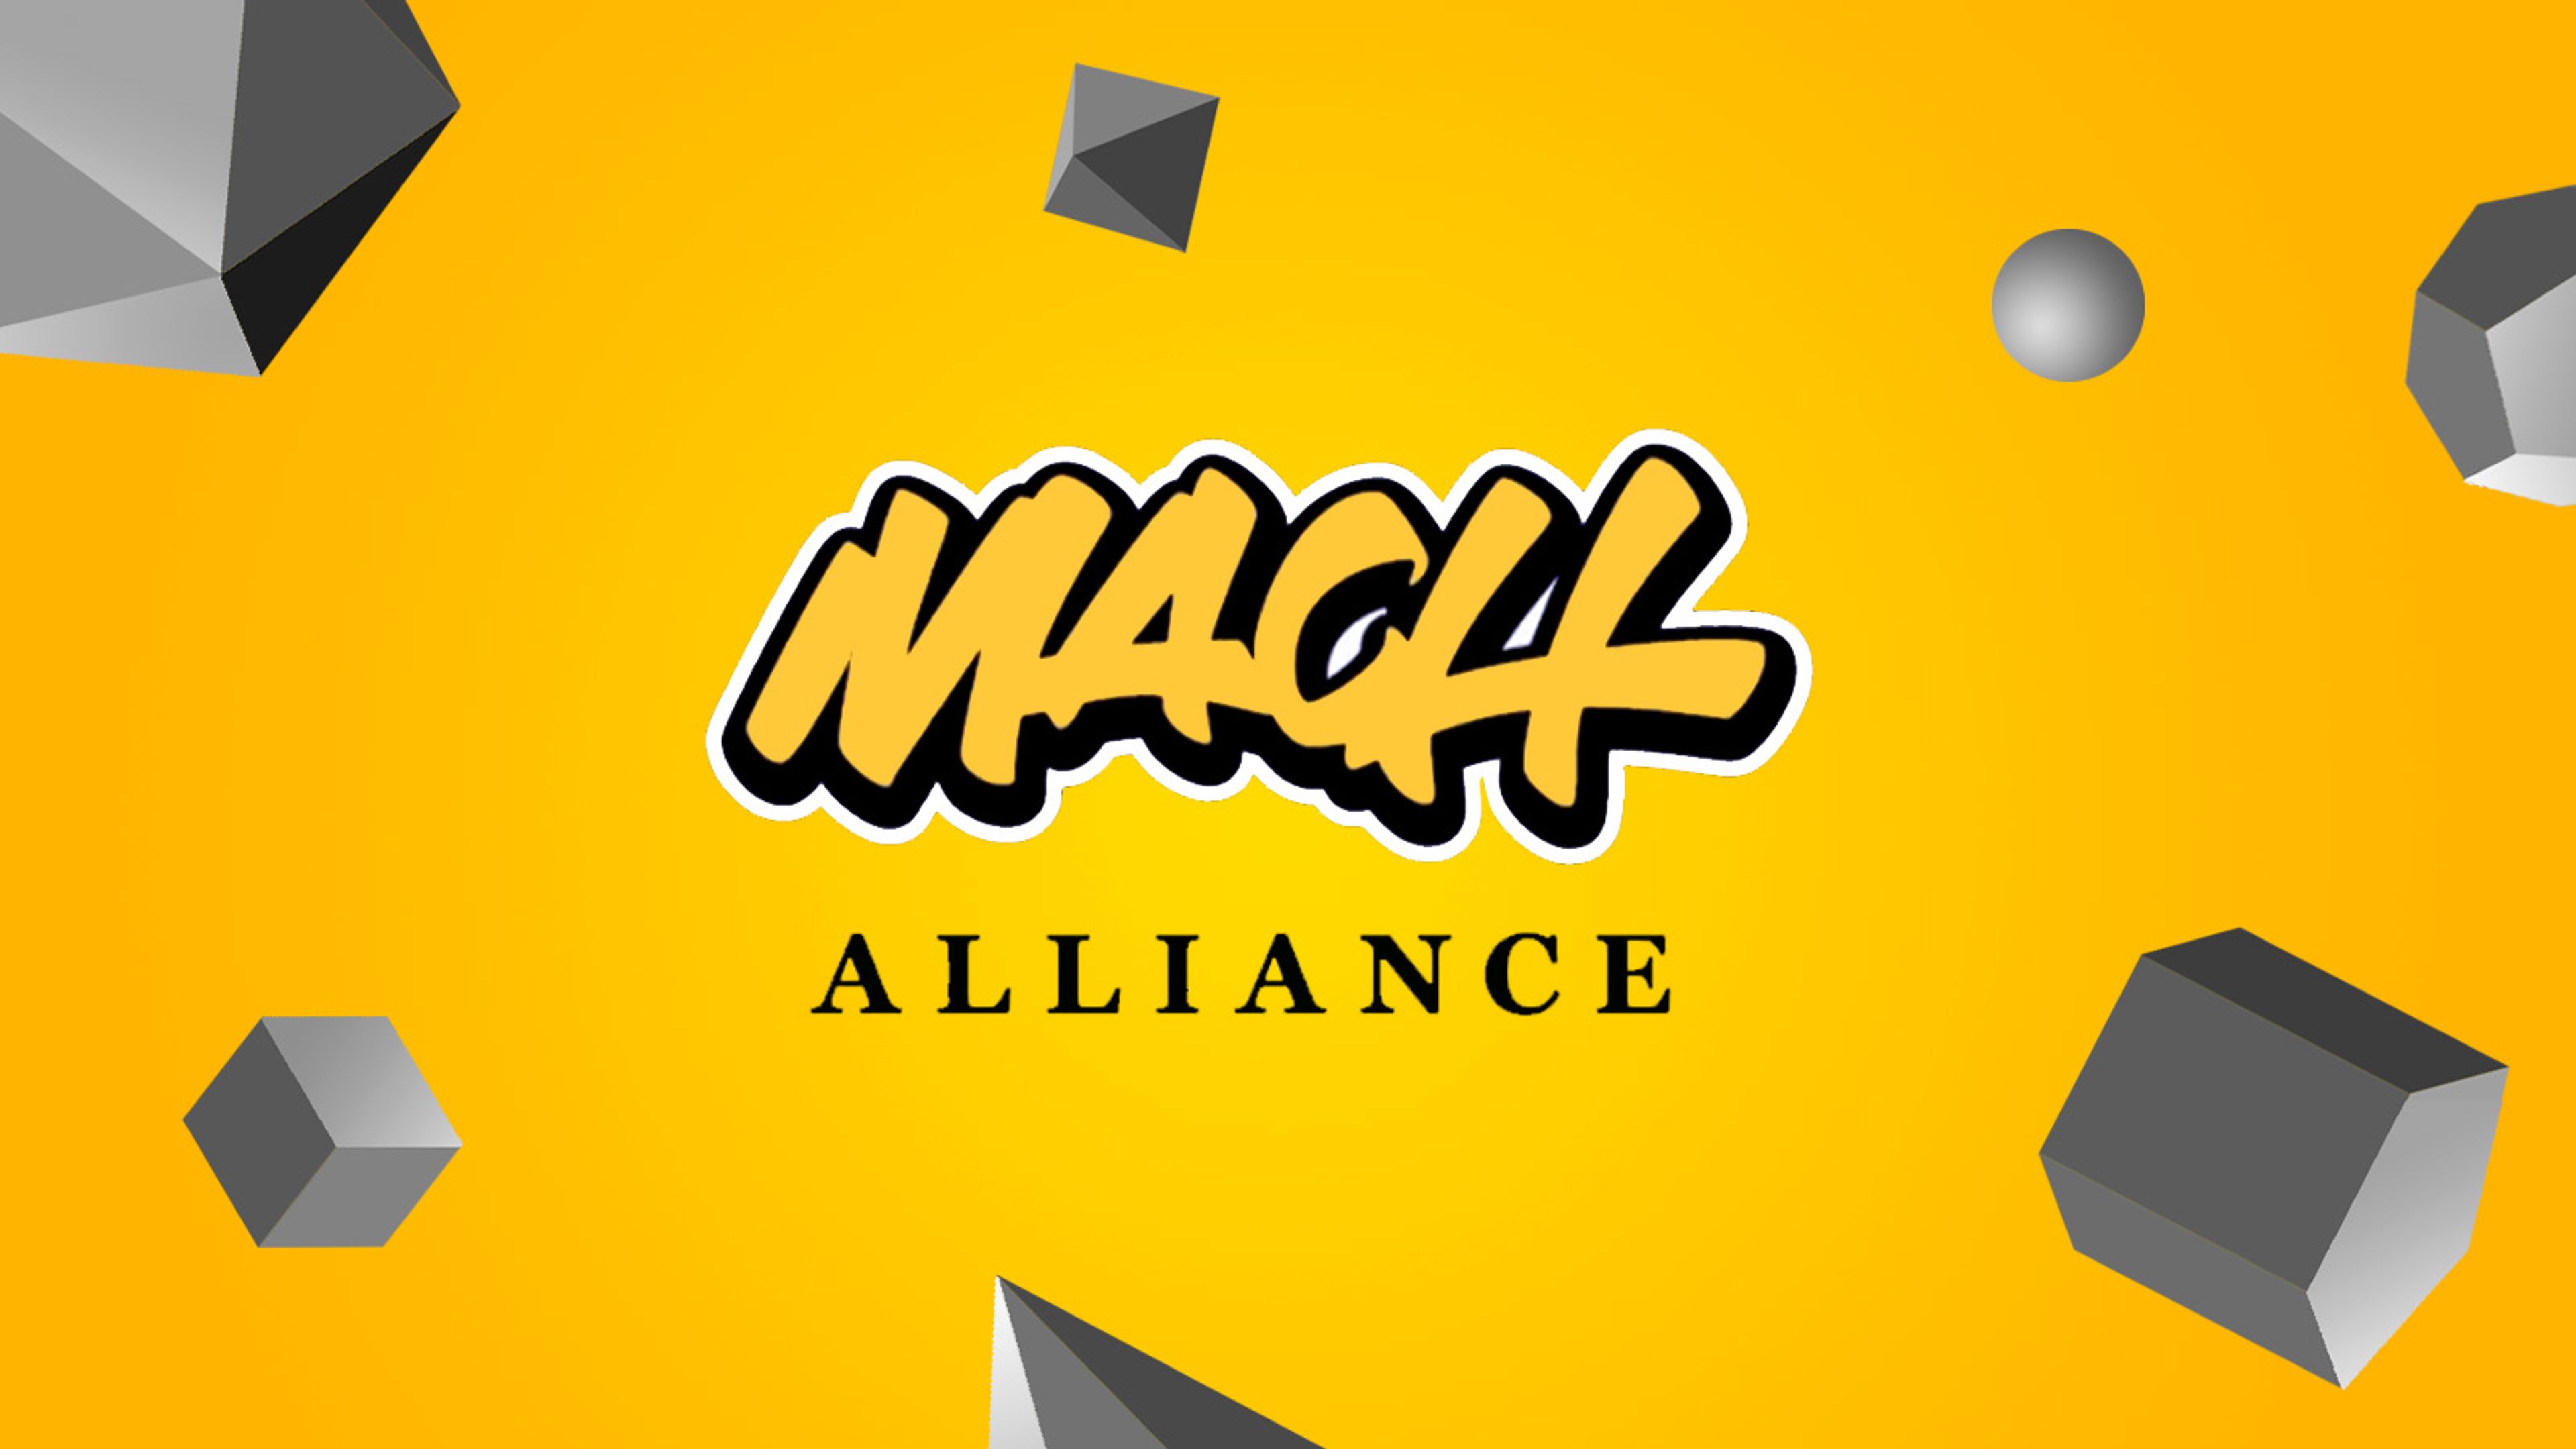 MACH Alliance logo surrounded by three-dimensional geometric shapes floating around it